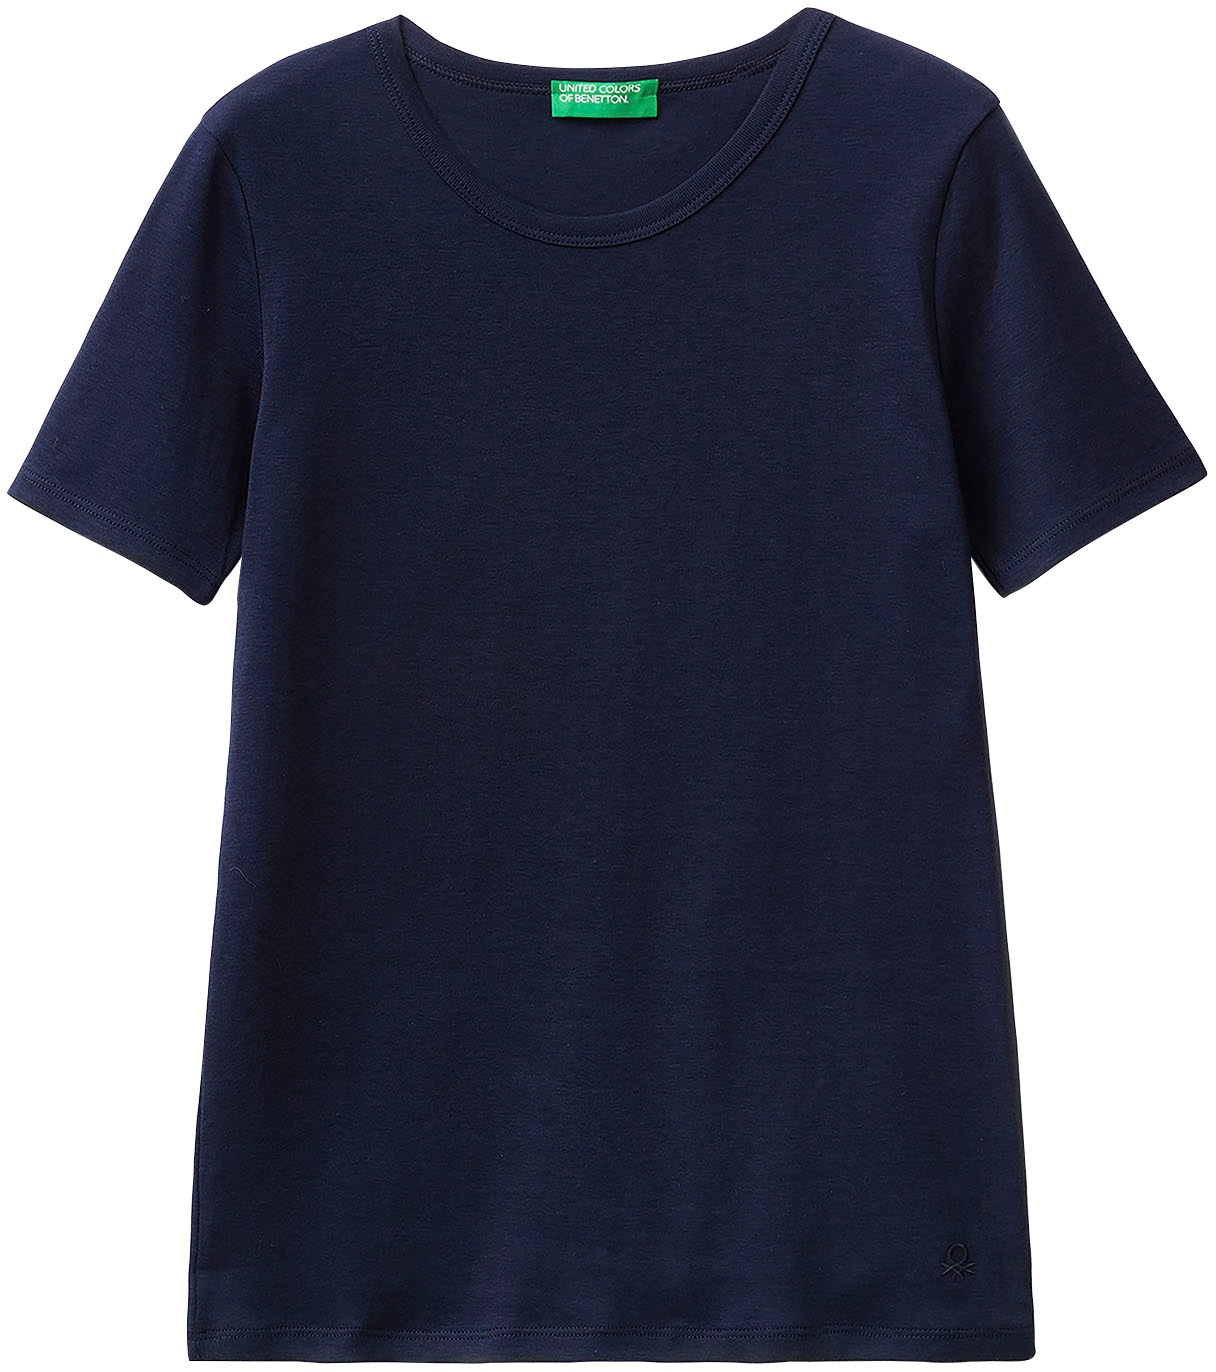 Colors United in of feiner Rippenqualität Benetton ♕ T-Shirt, bei